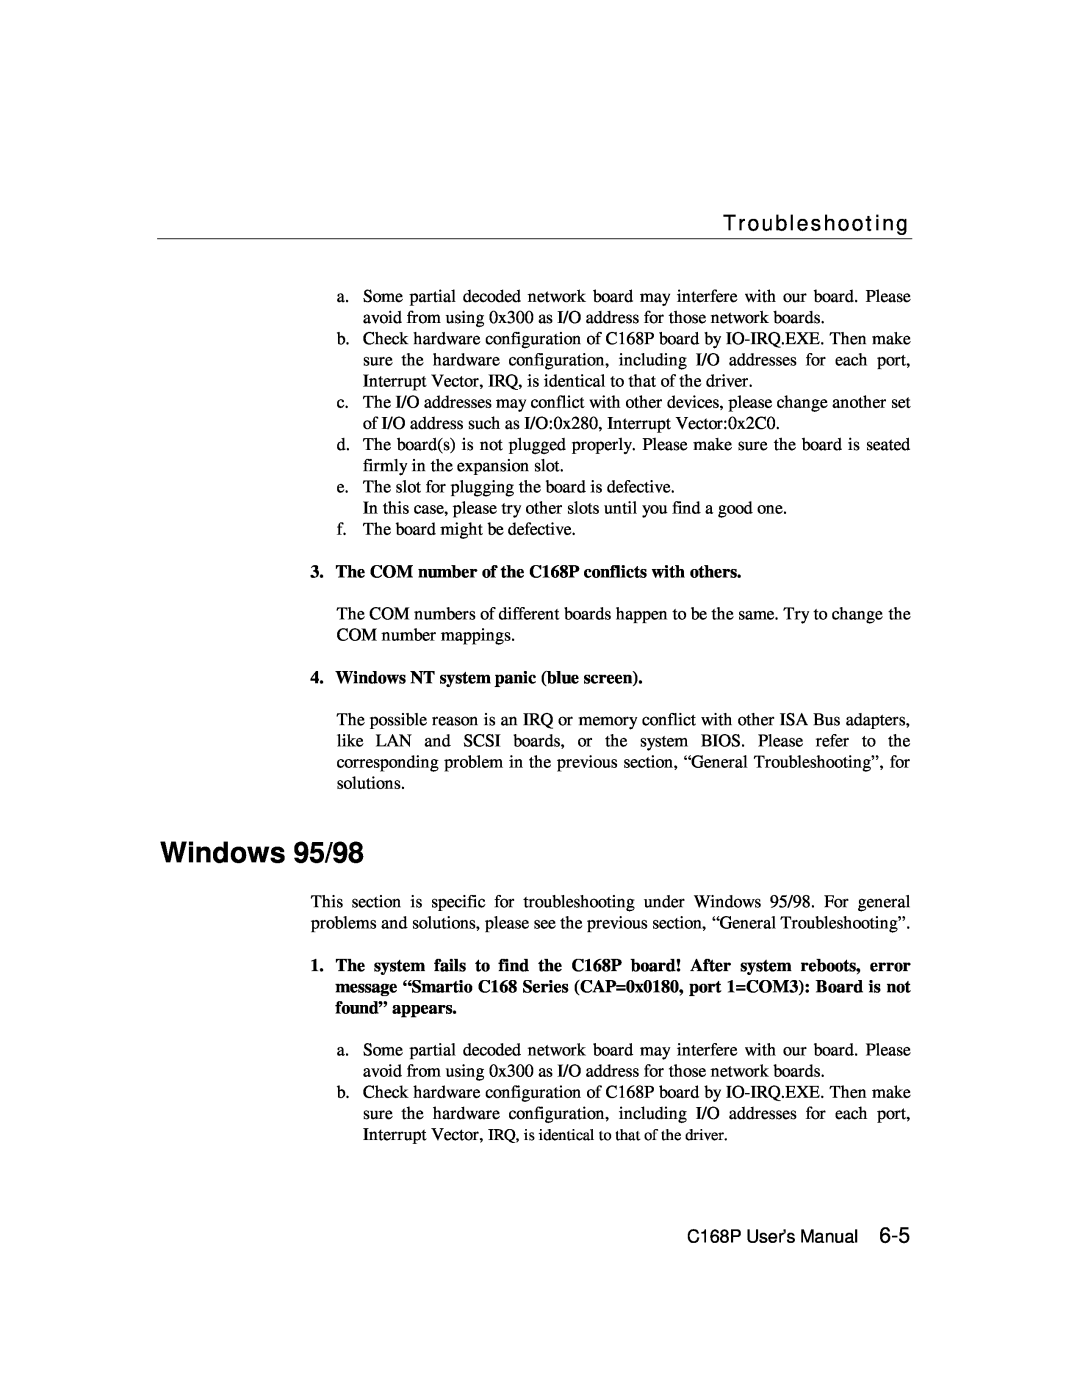 Moxa Technologies user manual Windows 95/98, Troubleshooting, The COM number of the C168P conflicts with others 